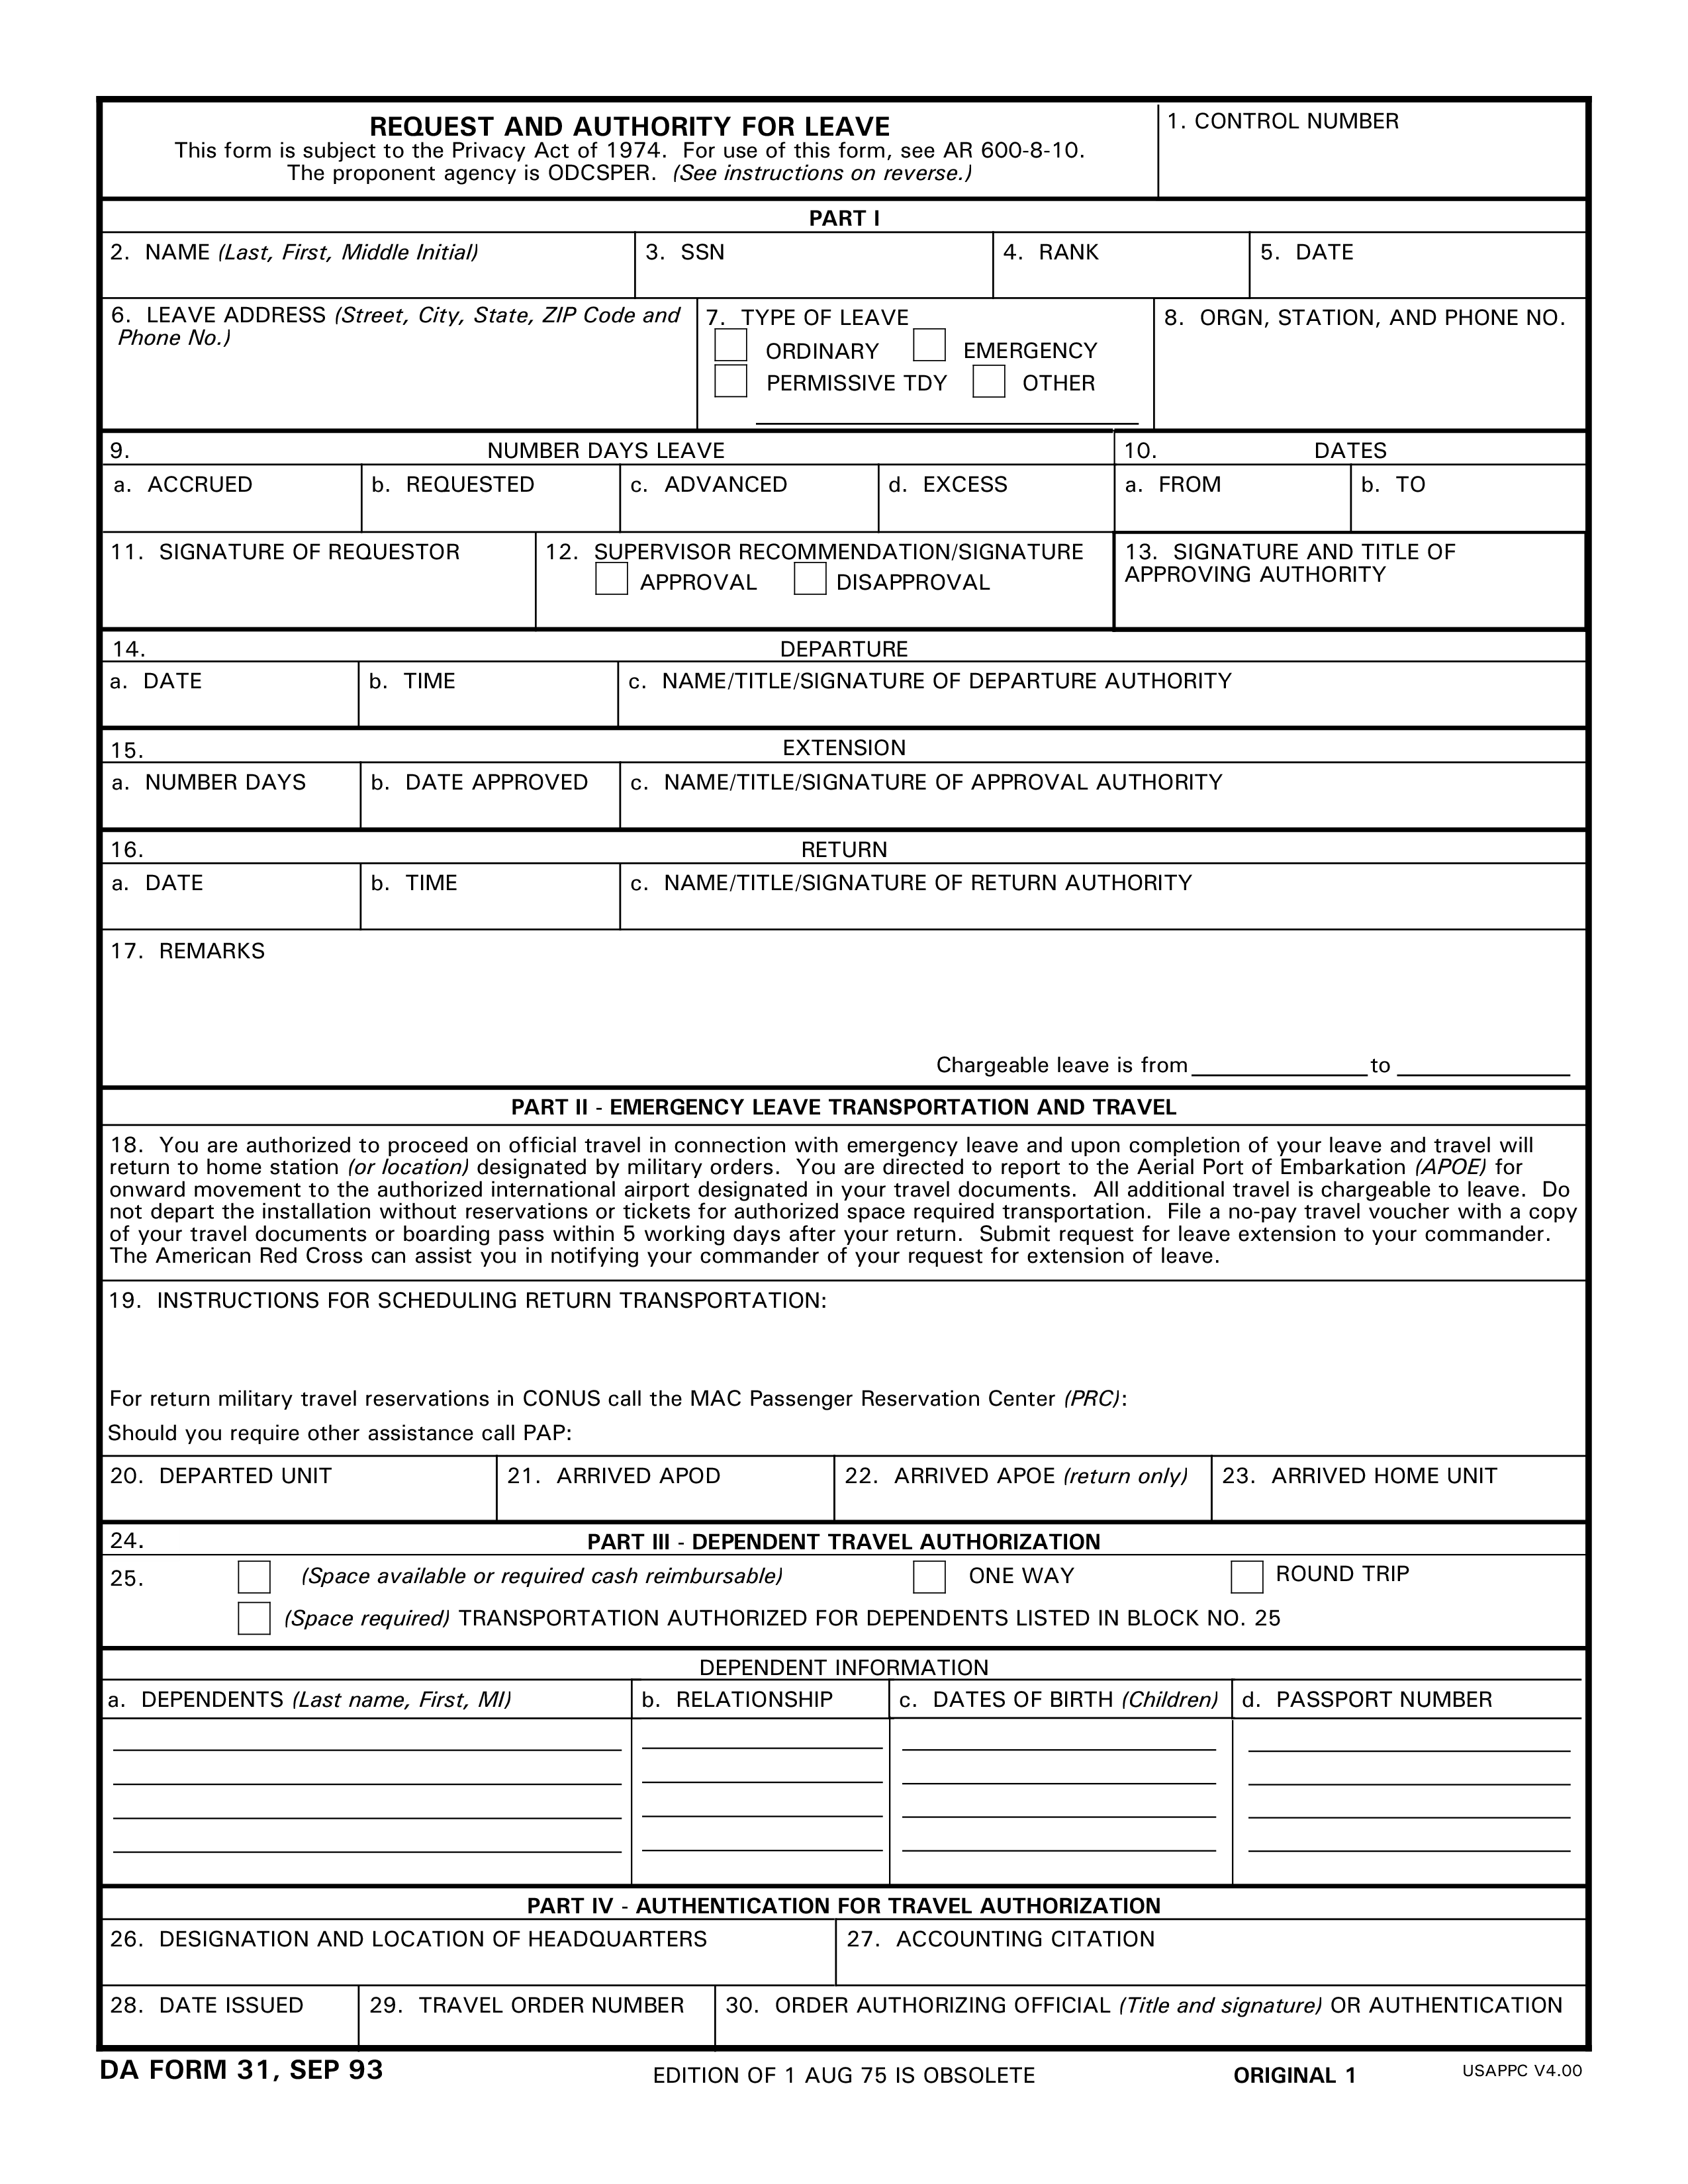 request and authority for leave form template modèles